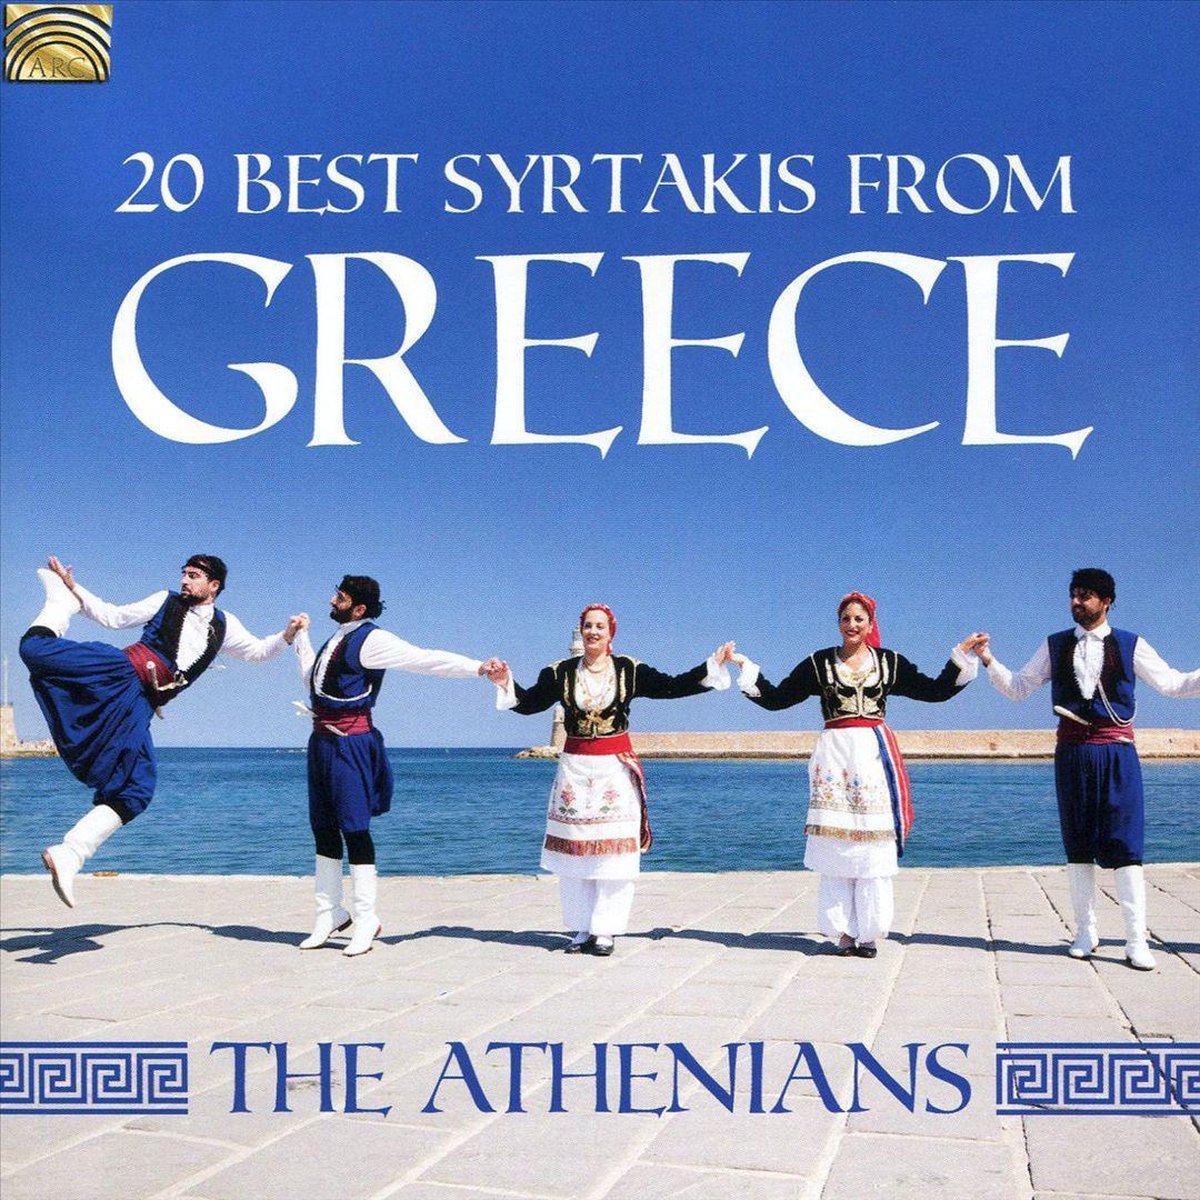 20 Best Syrtakis from Greece | The Athenians